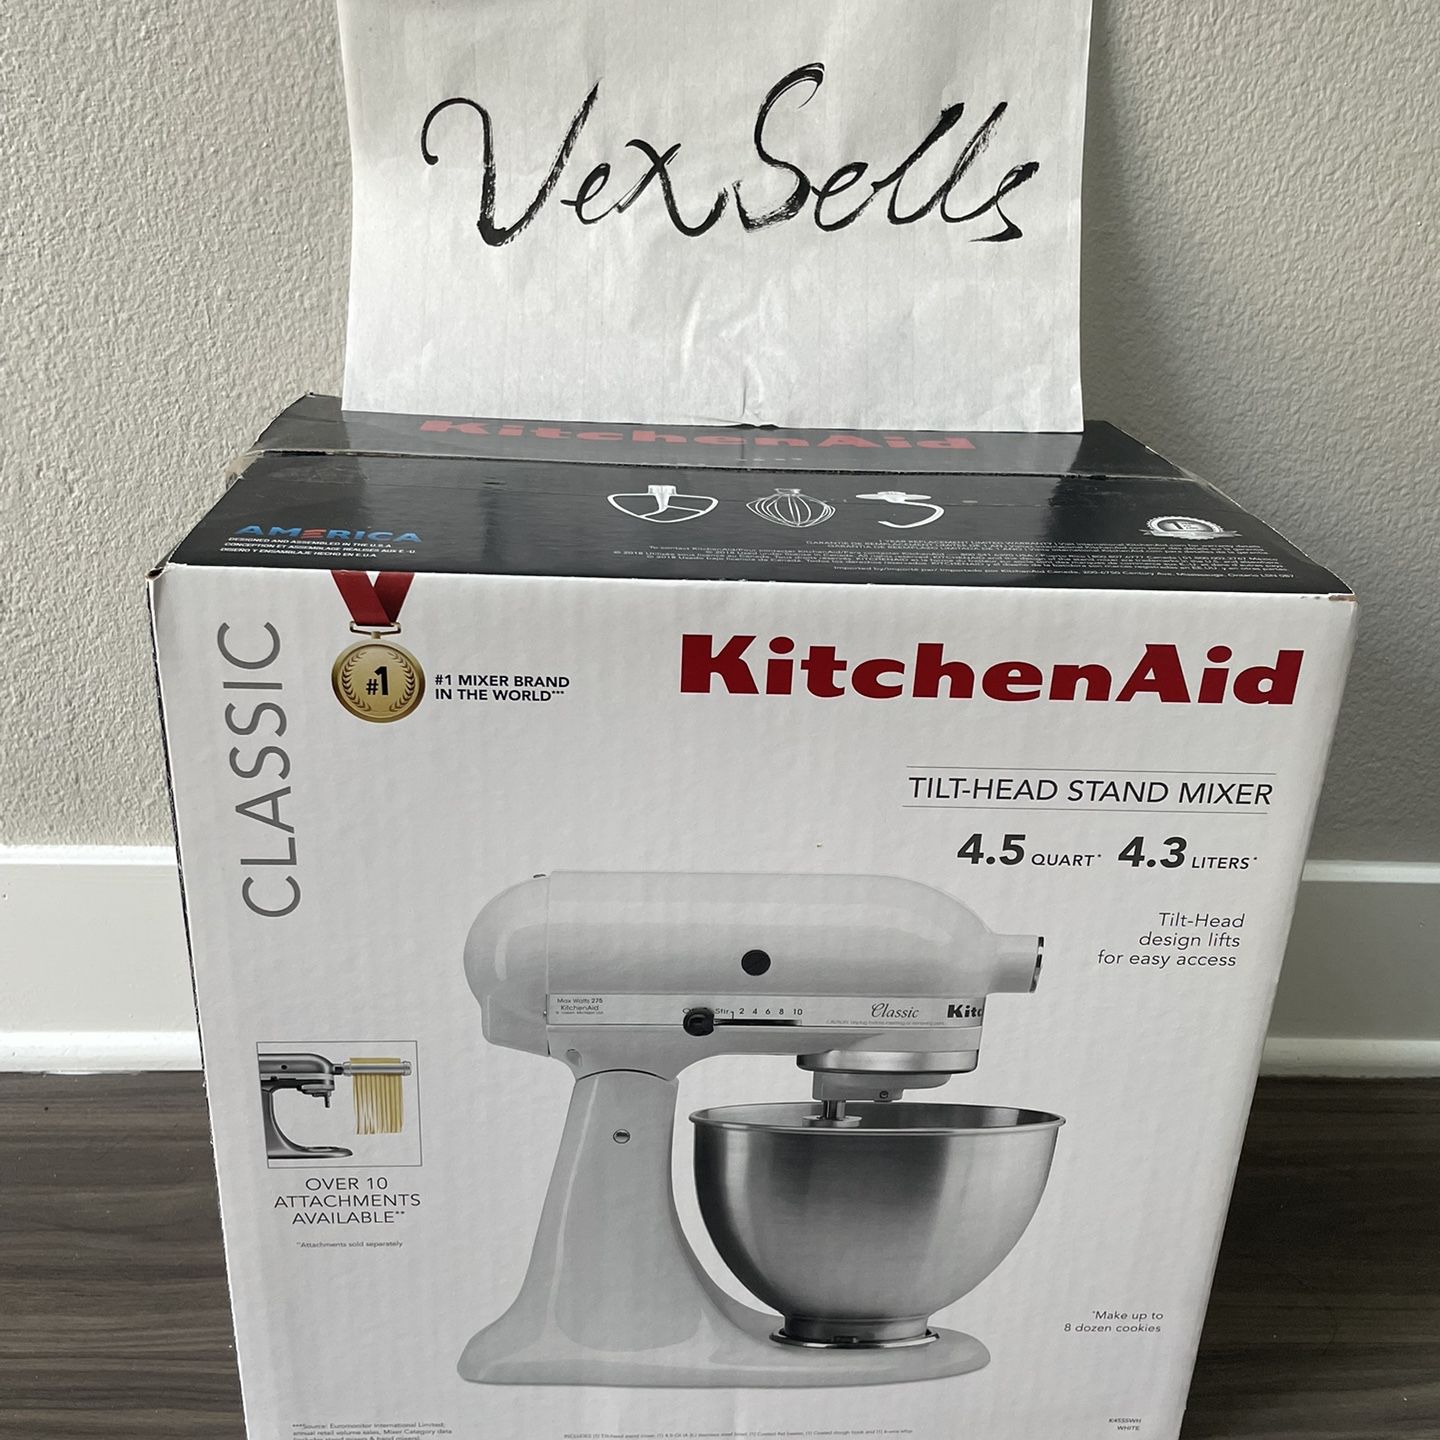 KitchenAid K45SS Mixer 4.5 Qt. Tilt Head Classic Series Stand Mixer White  for Sale in Cohasset, CA - OfferUp